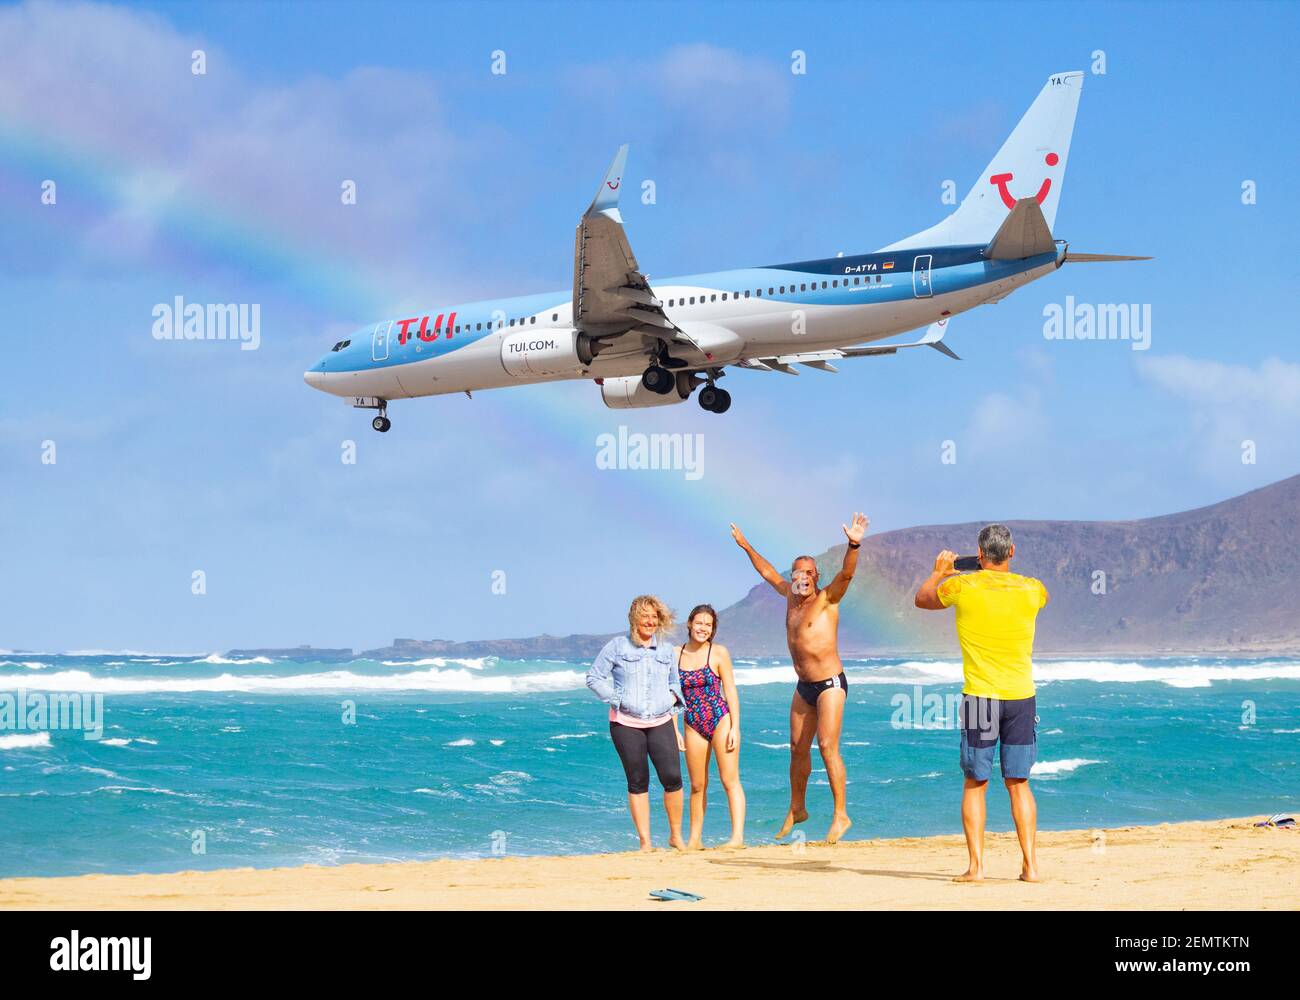 Composite image of TUI aircraft flying over beach in Spain with rainbow in sky. Stock Photo